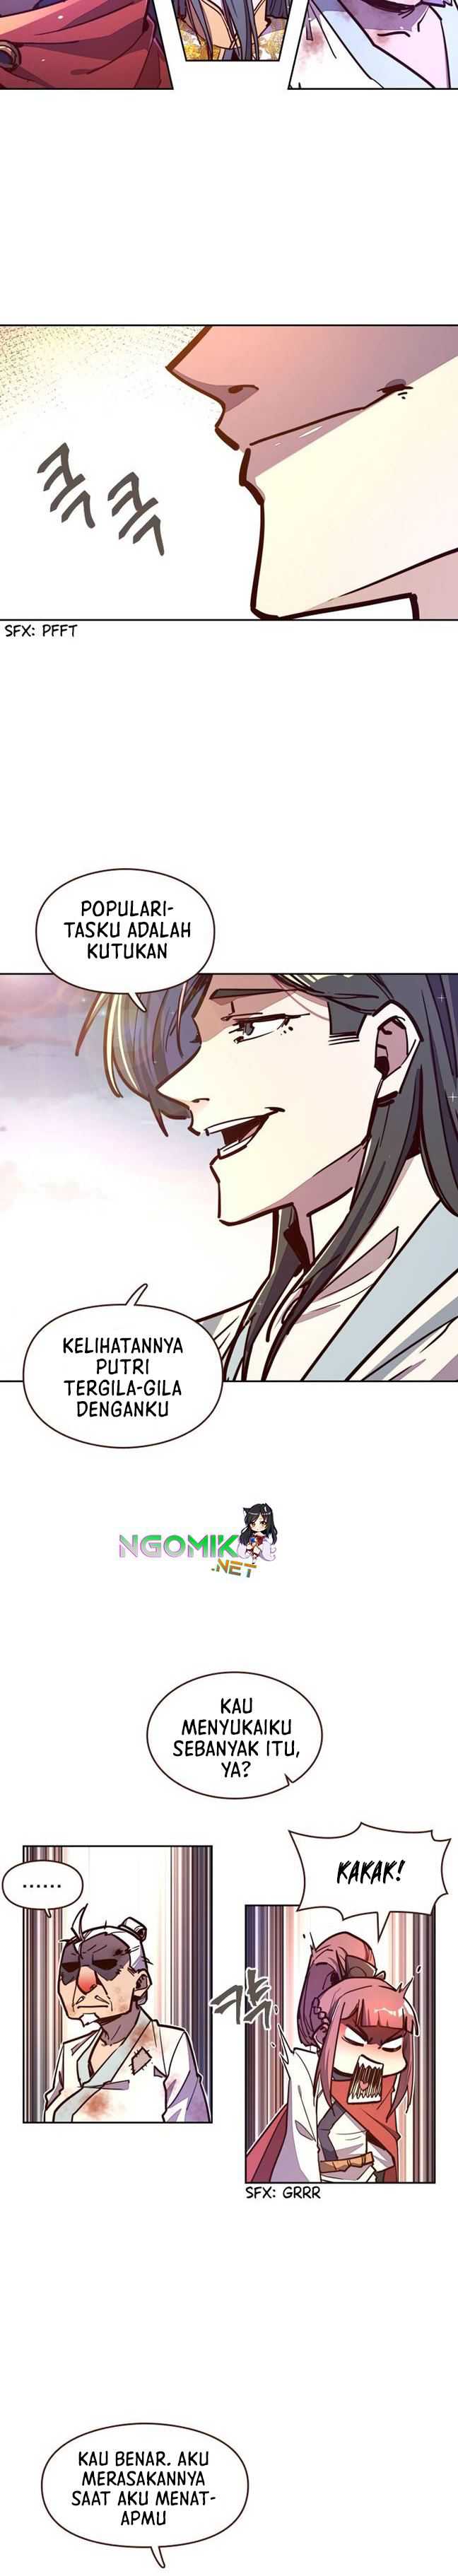 Life and Death: The Awakening Chapter 44 bahasa indonesia